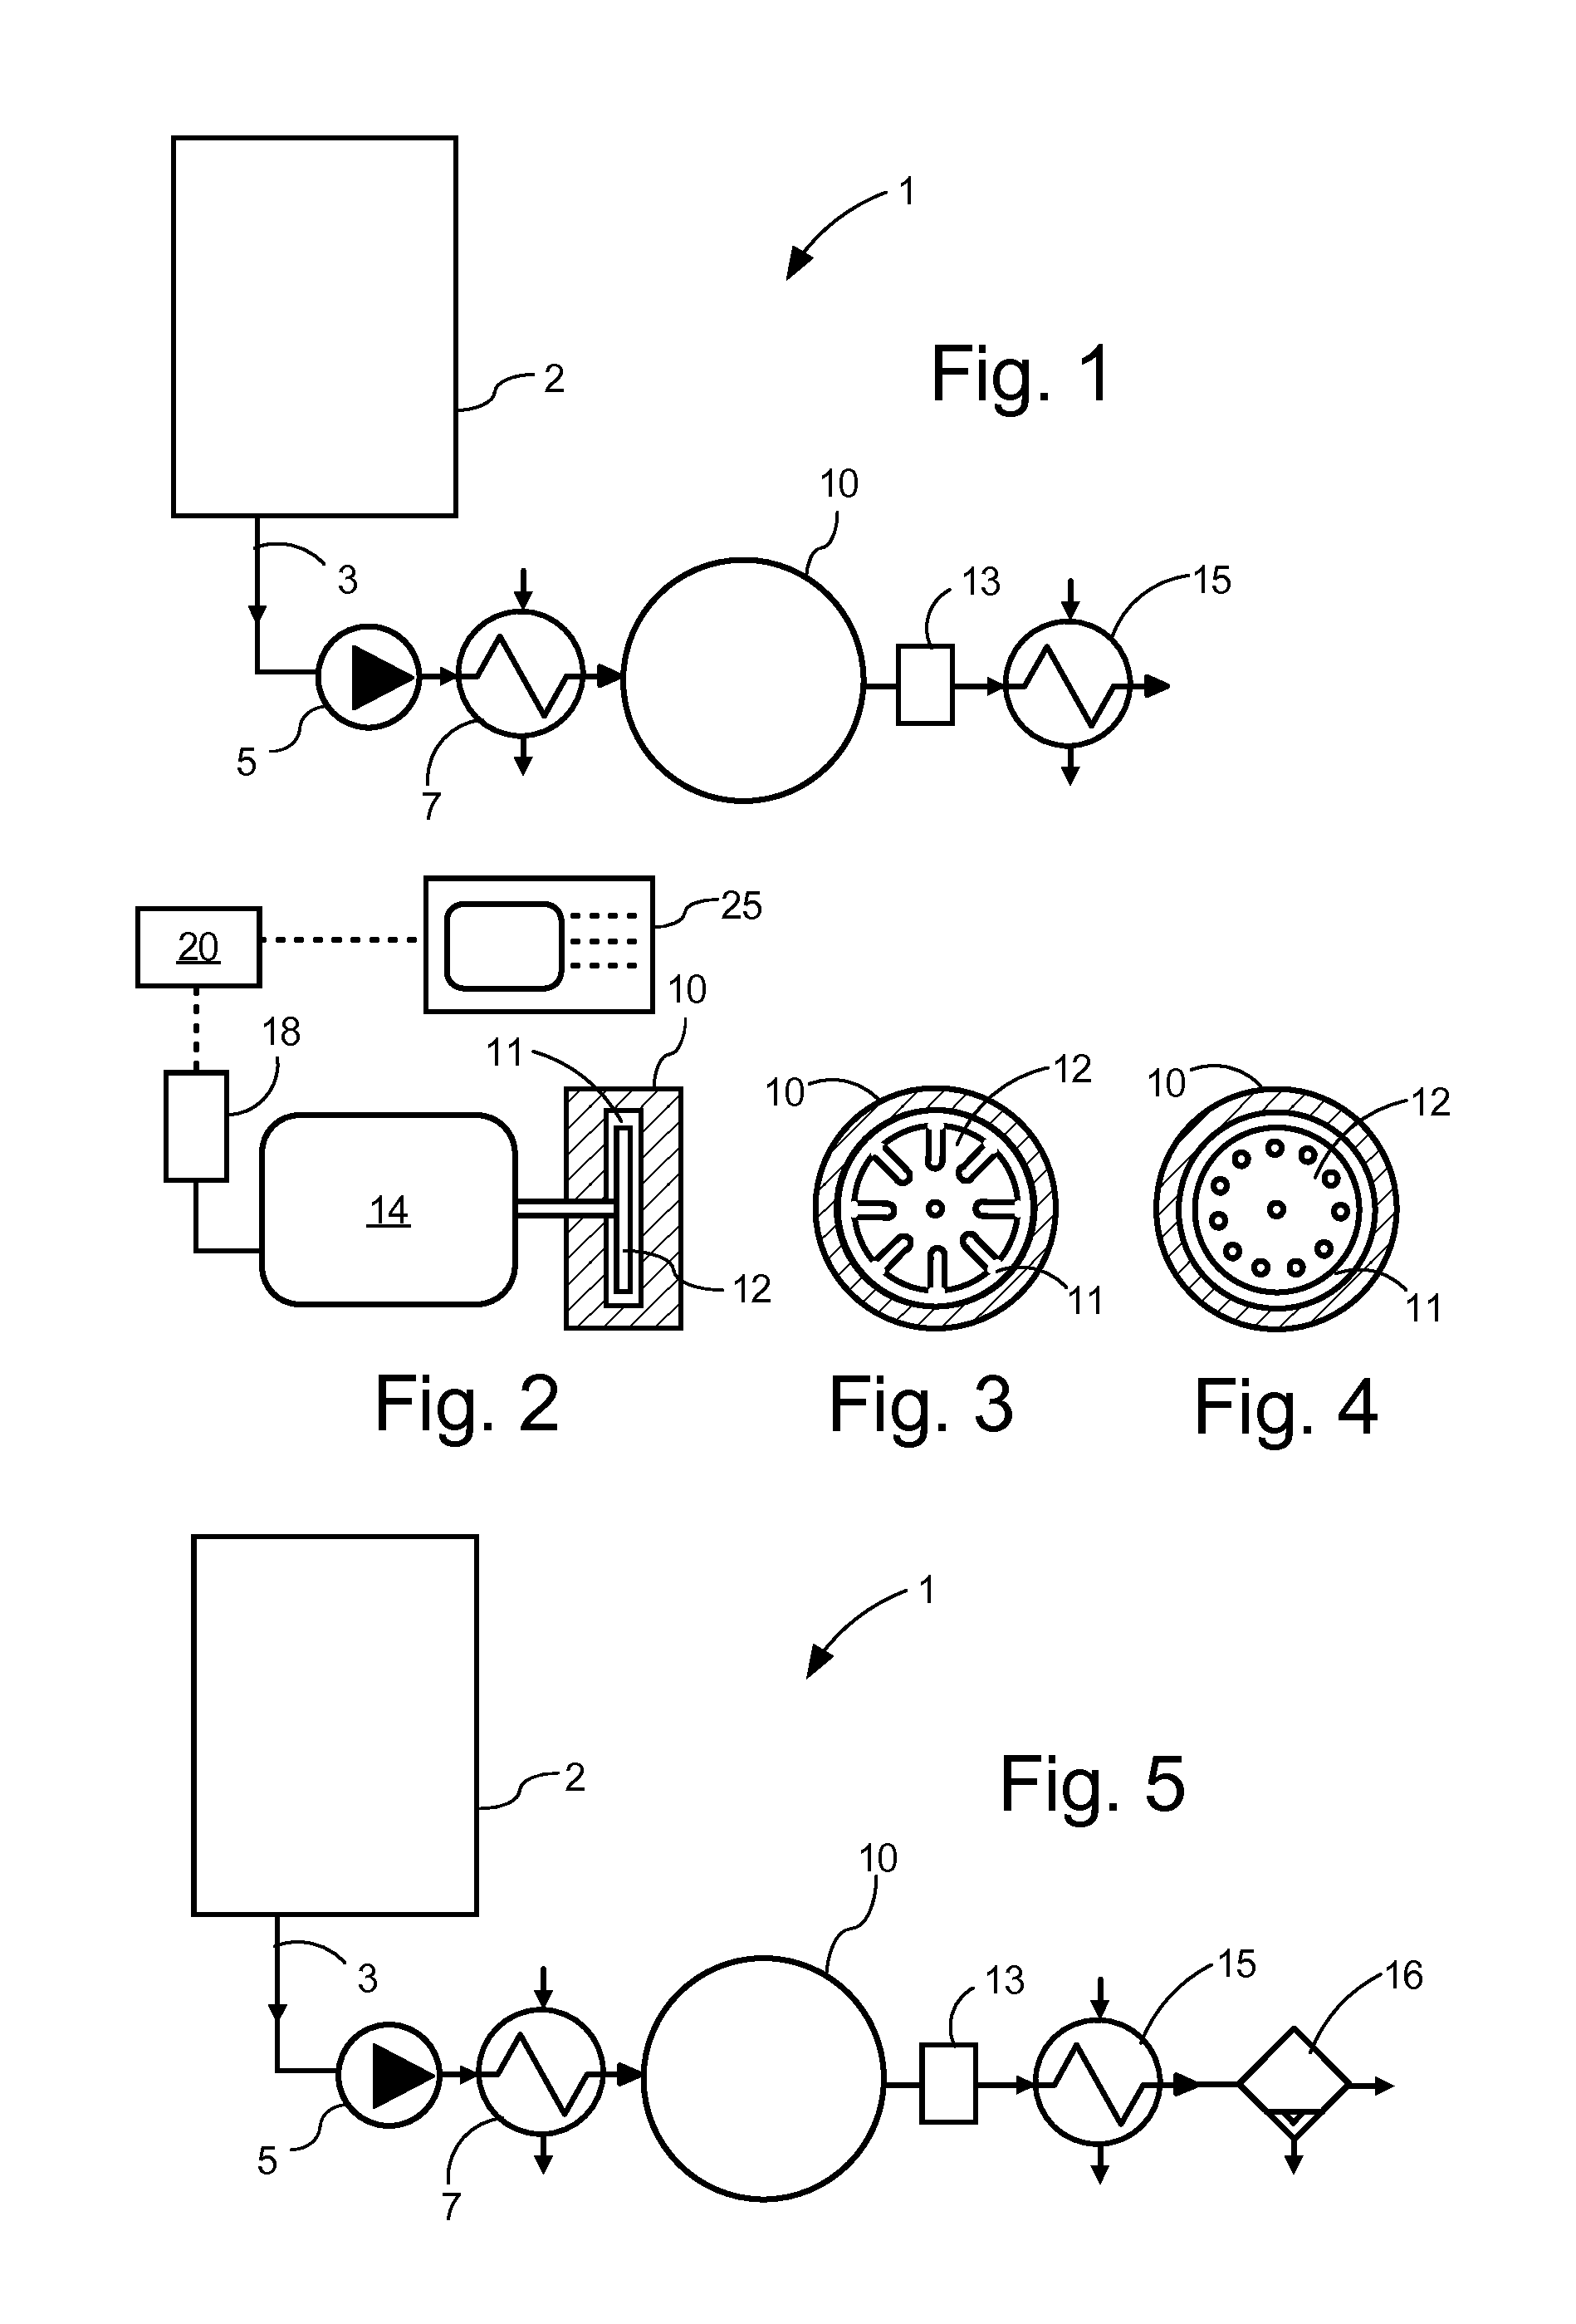 Method, Use And Apparatus For Continuous Reversal Or Breaking Of An Oil-In-Water Emulsion Food Product By Means Of Hydrodynamic Cavitation